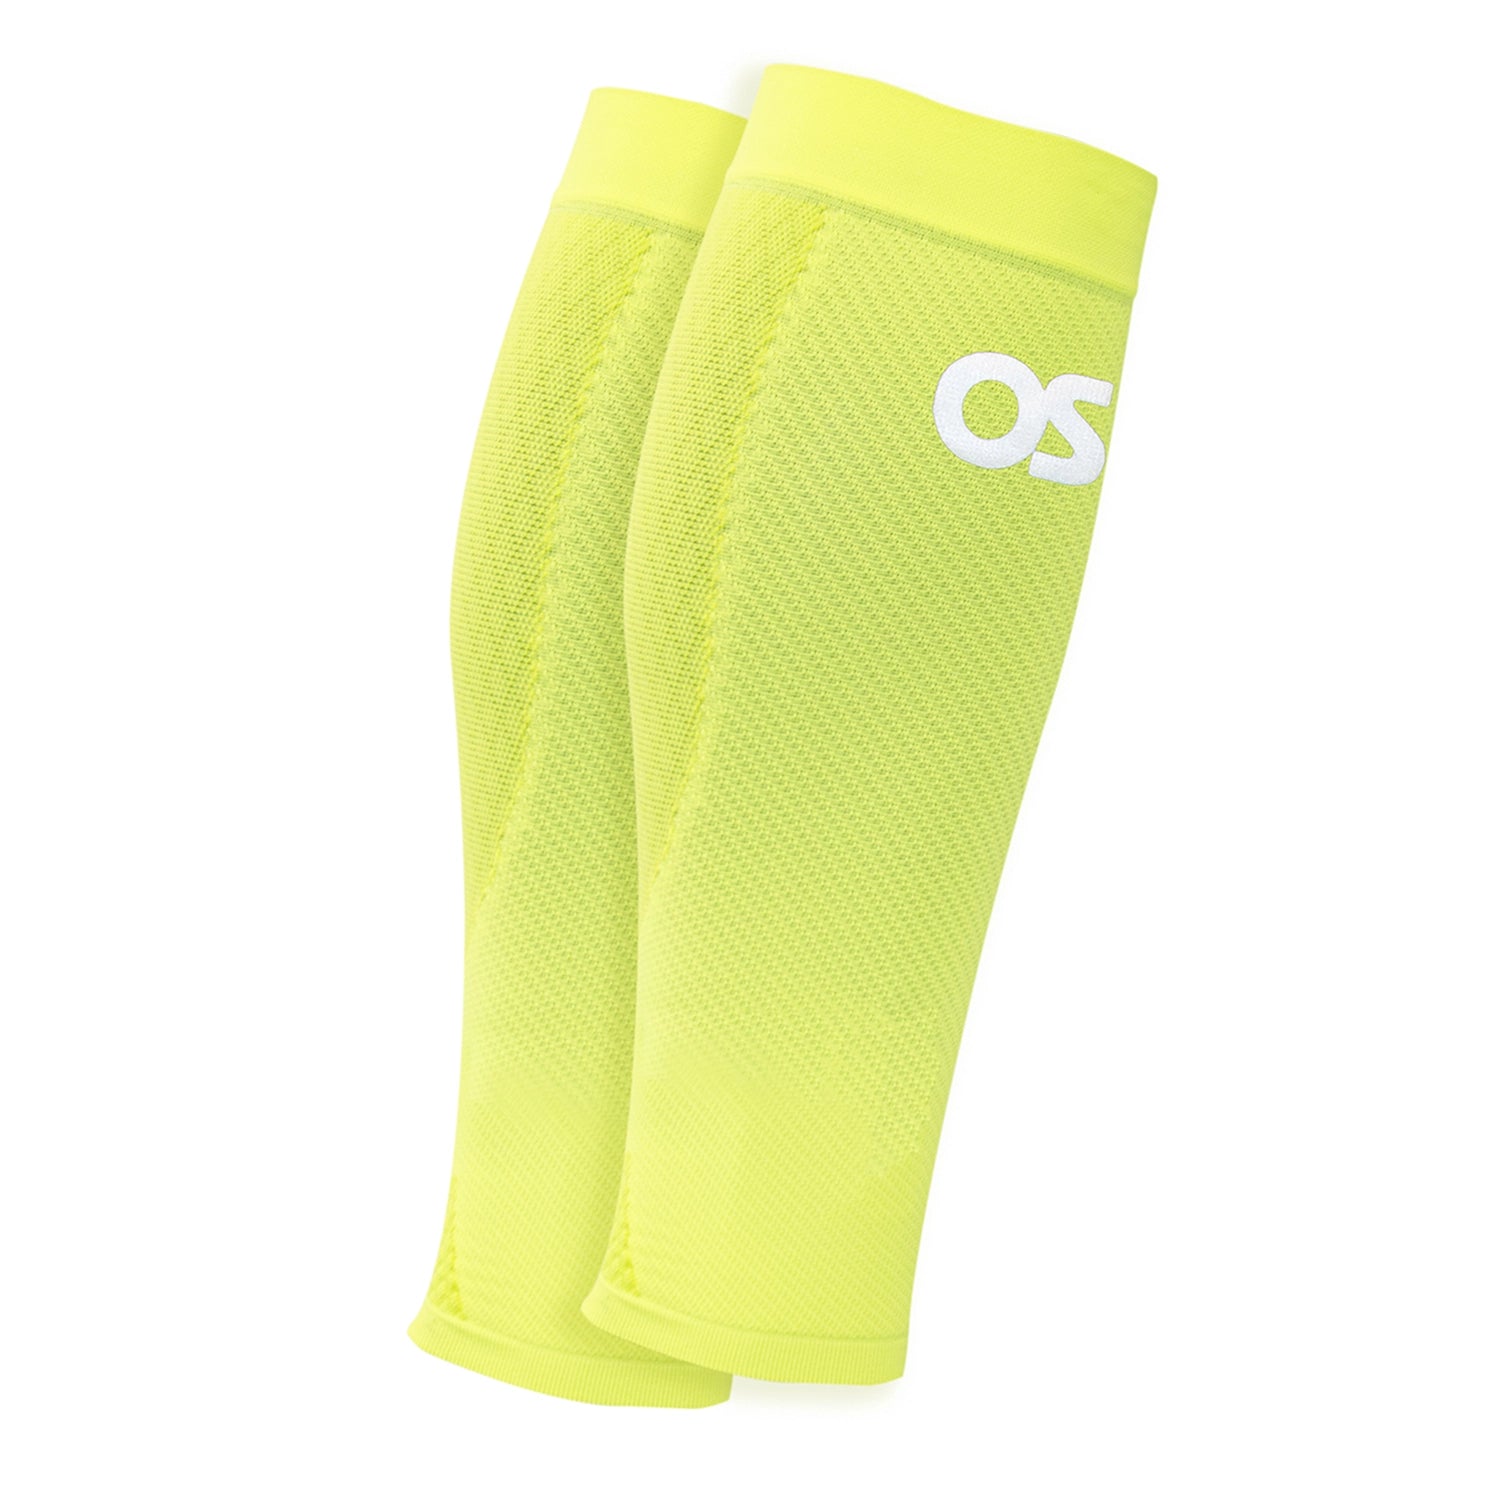 CS6 Performance Calf Sleeves in reflective yellow | OS1st